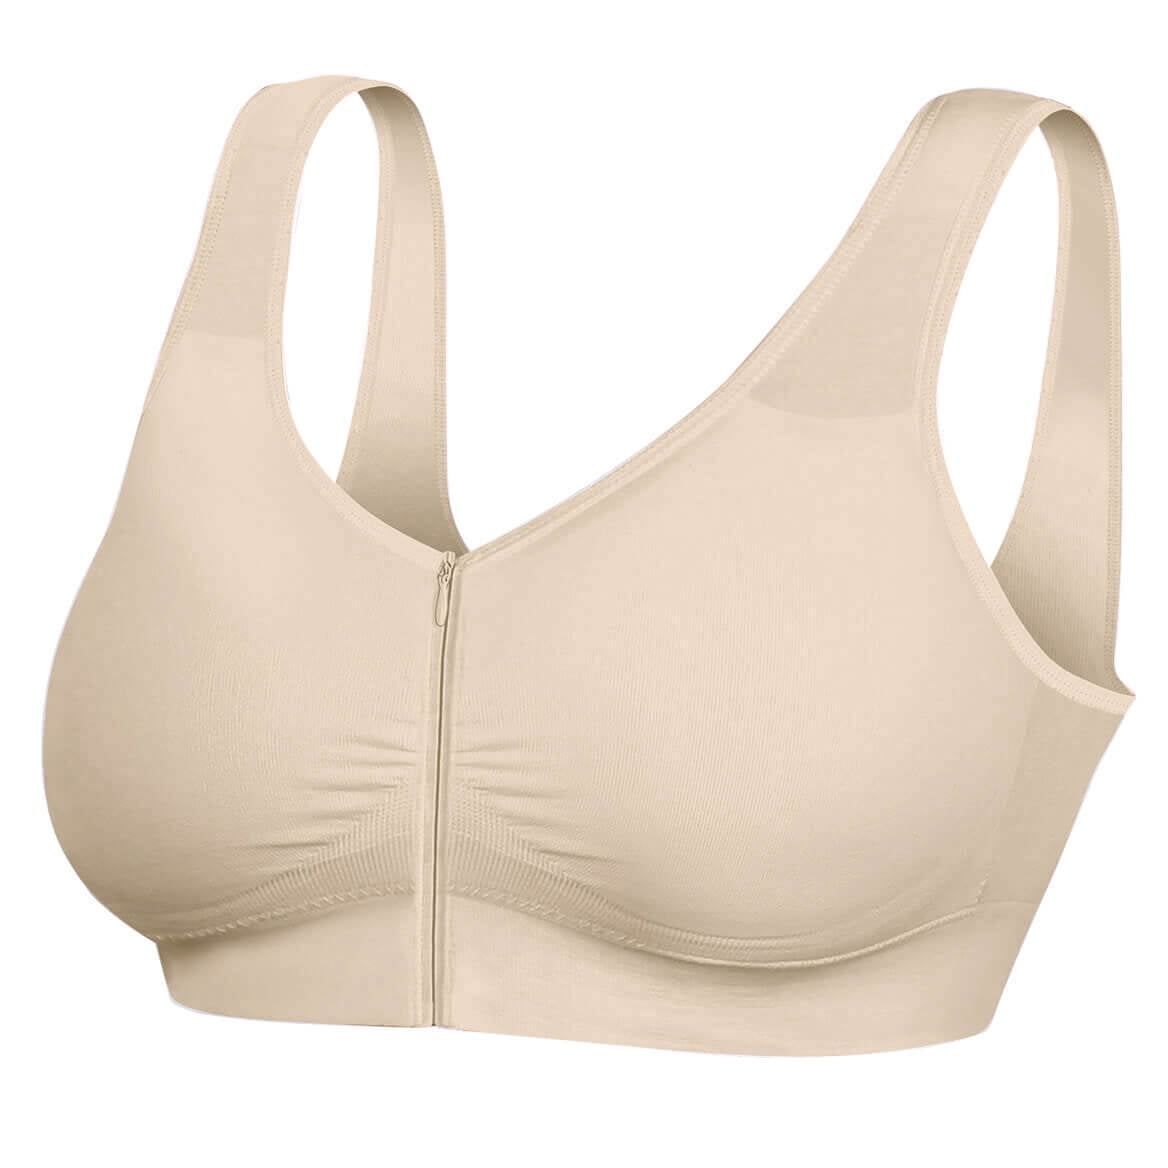 Dream Bras Copper Therapy Zip-Front Bra, Nude, Large 